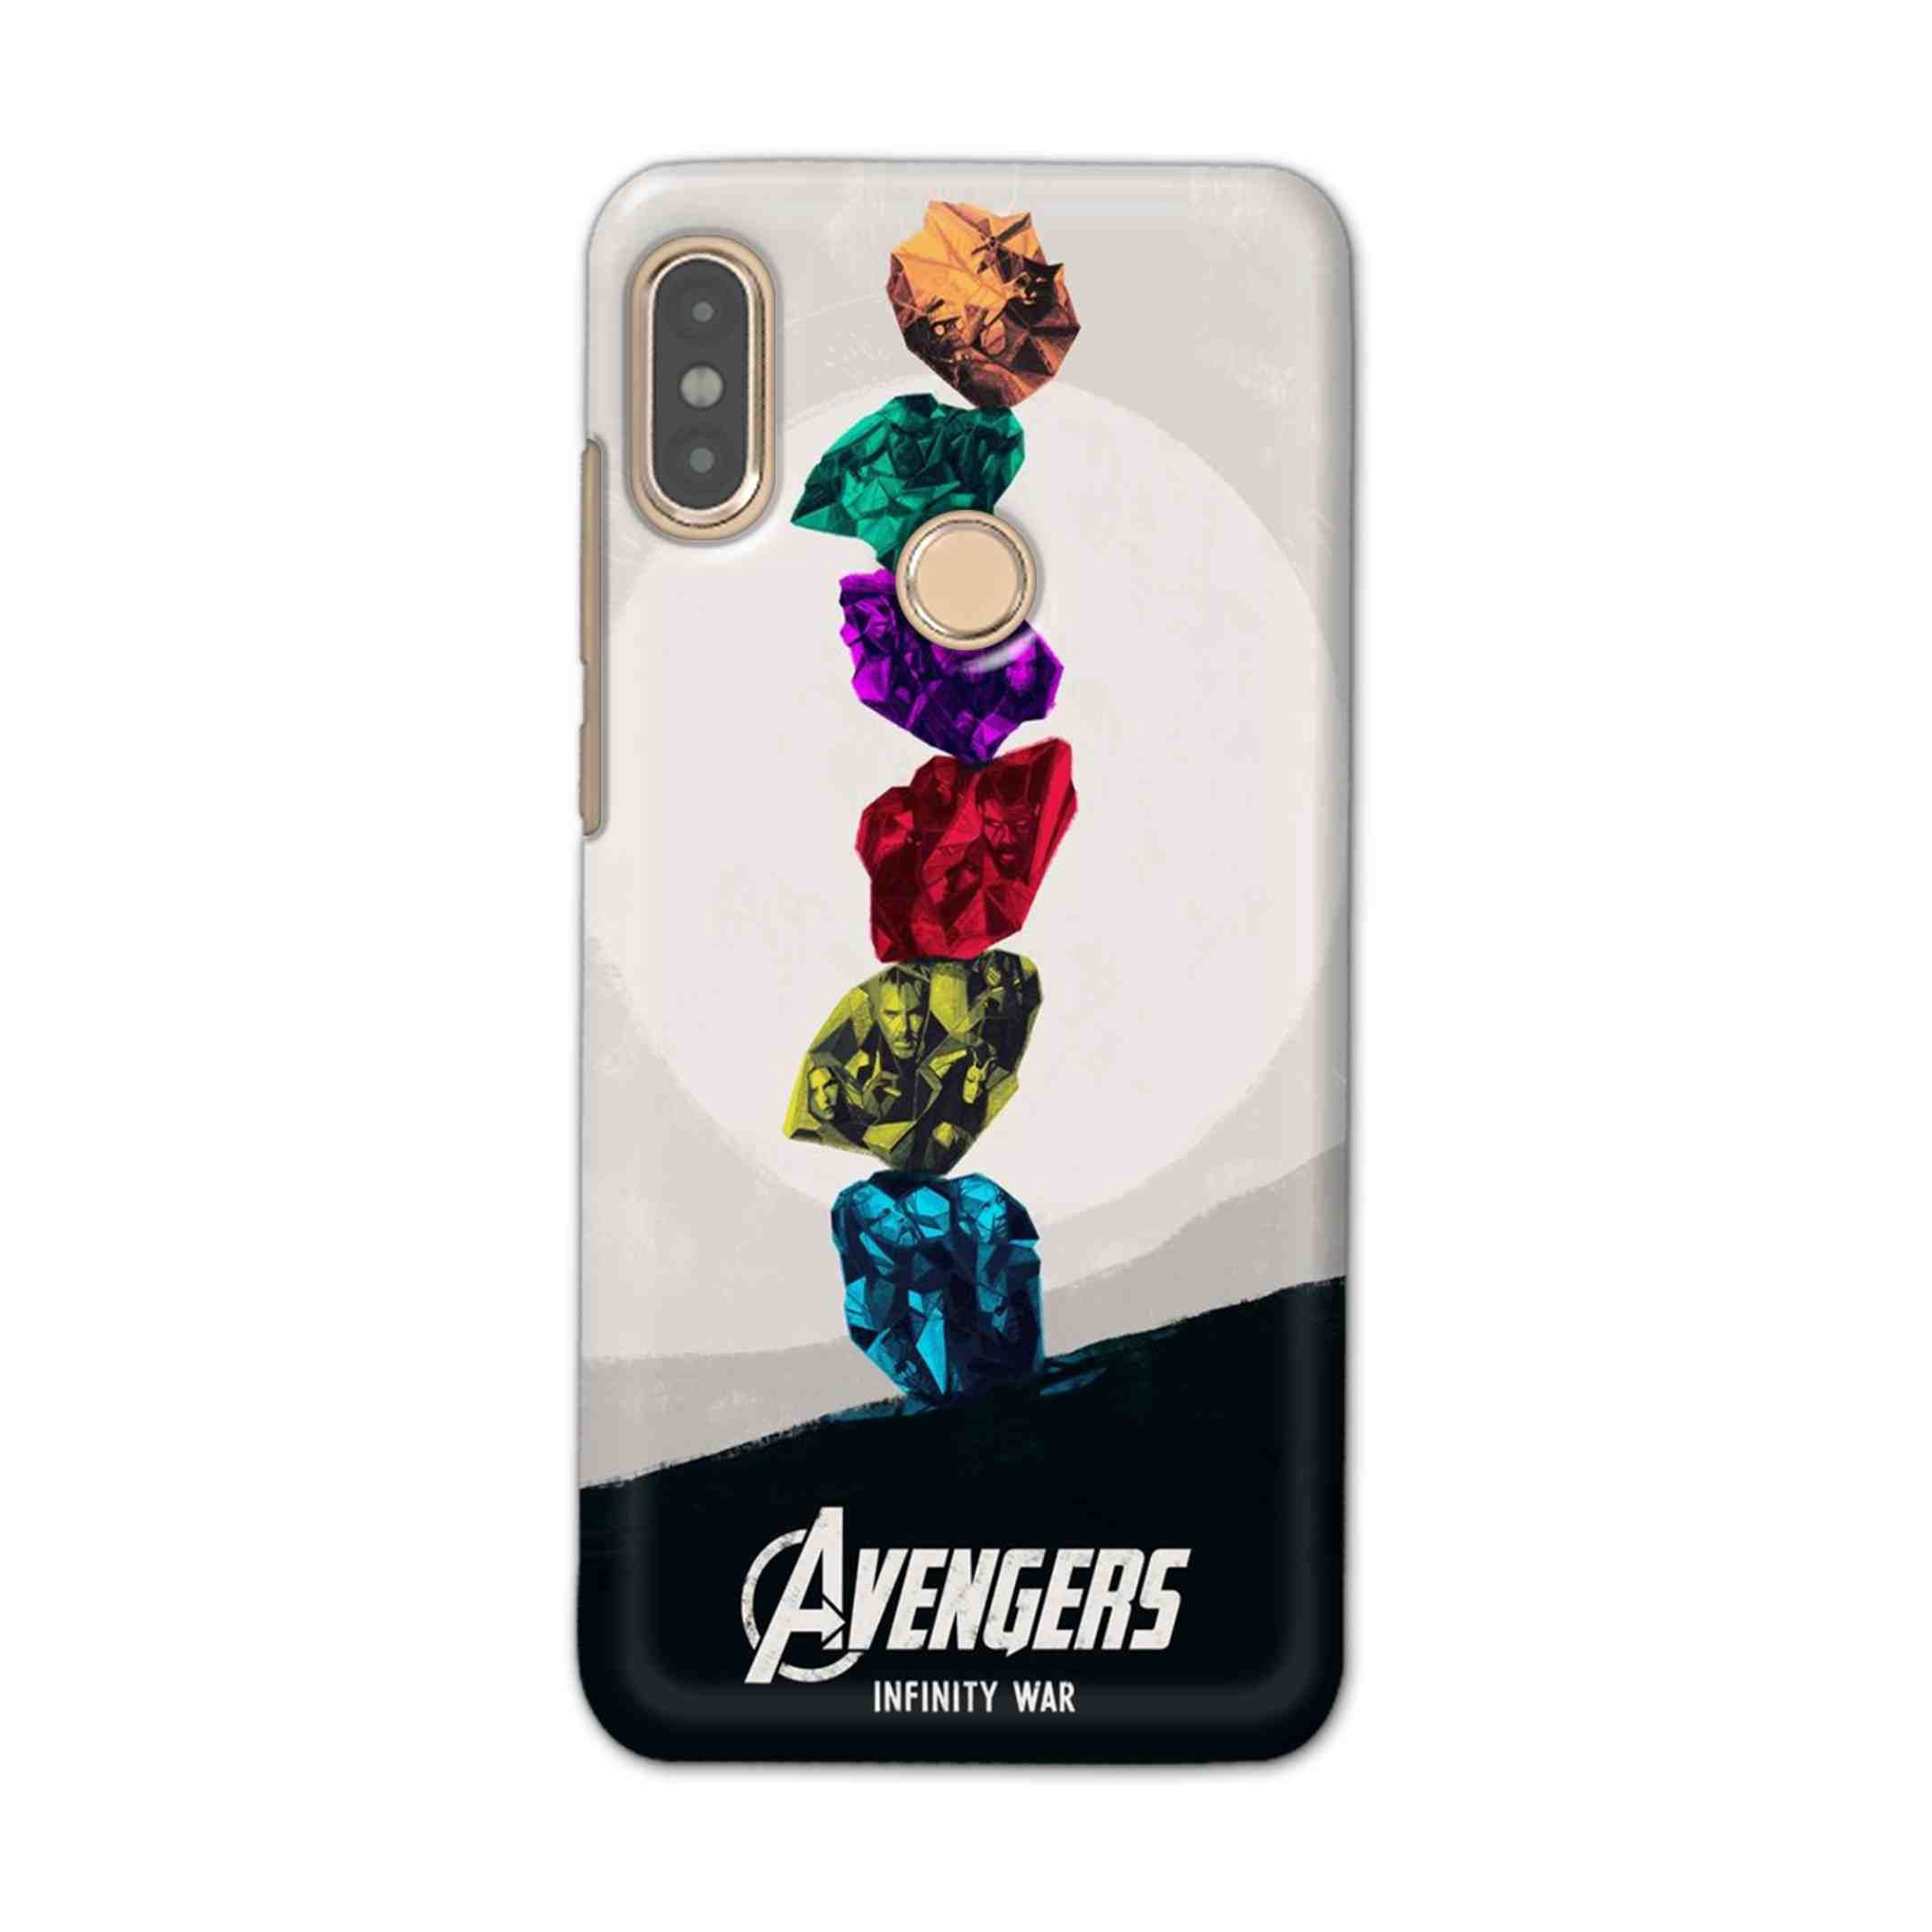 Buy Avengers Stone Hard Back Mobile Phone Case Cover For Xiaomi Redmi Note 5 Pro Online